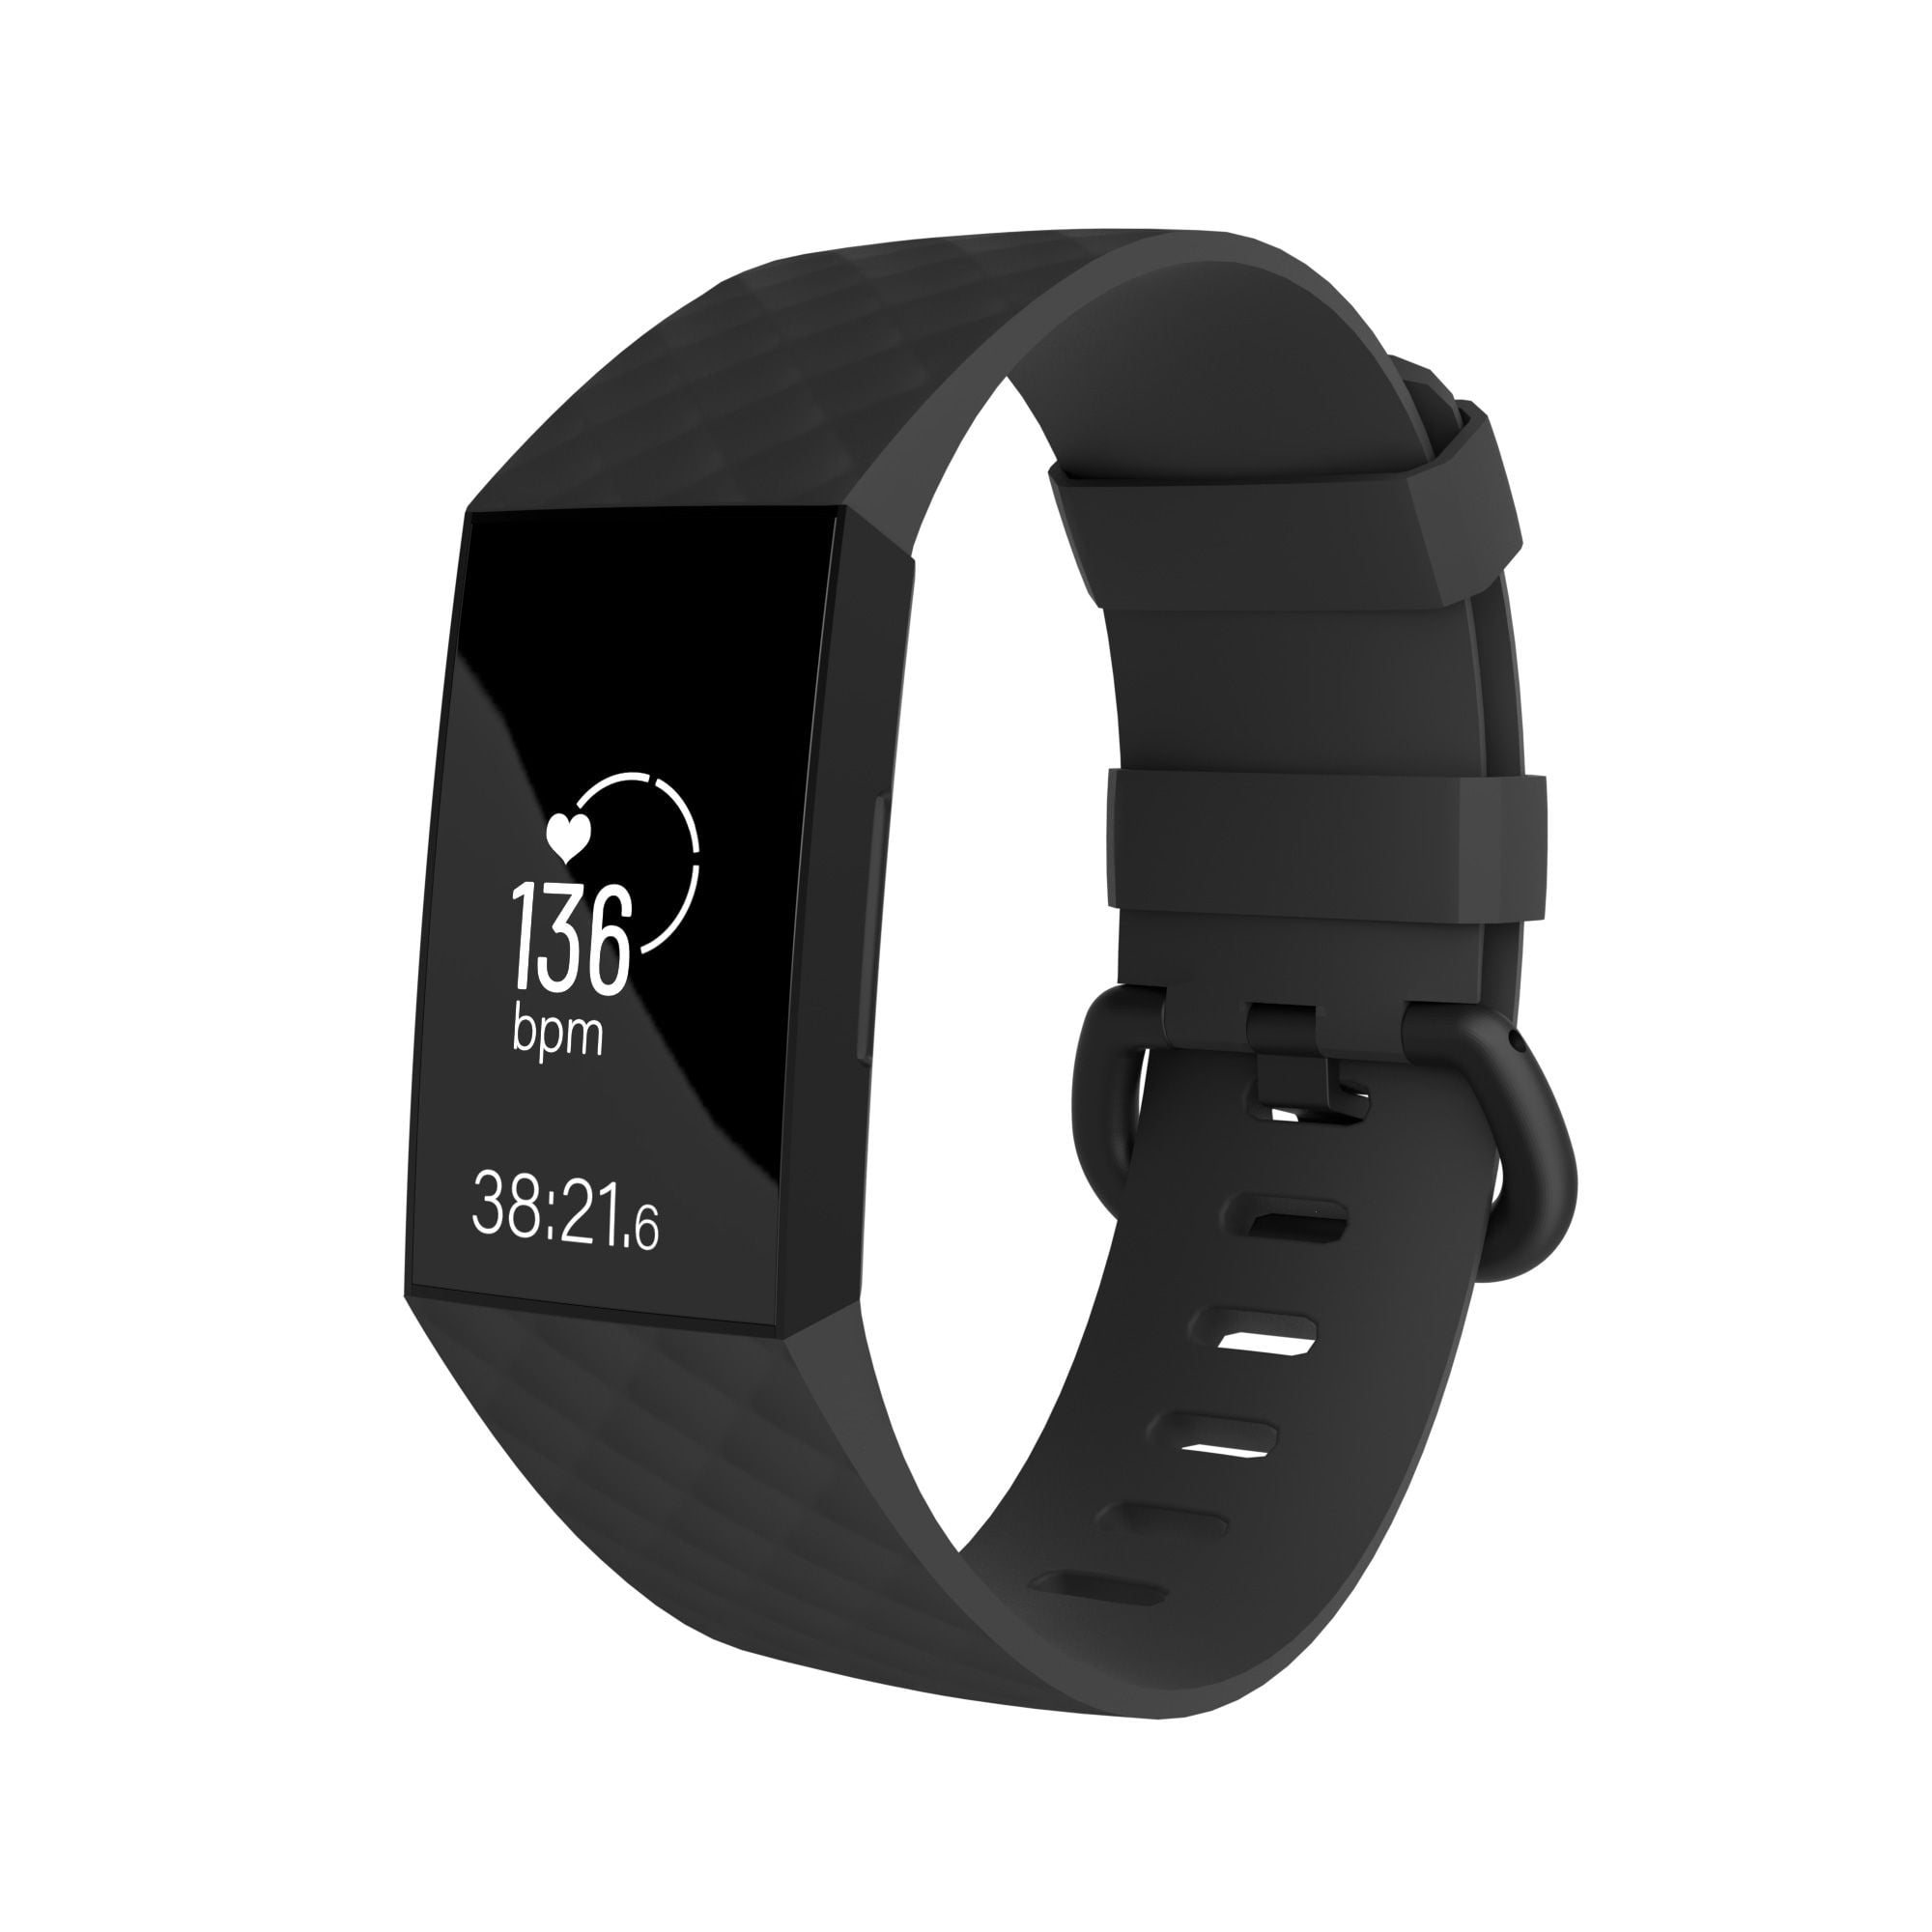 Fitbit Charge 3 bands, by Zodaca 